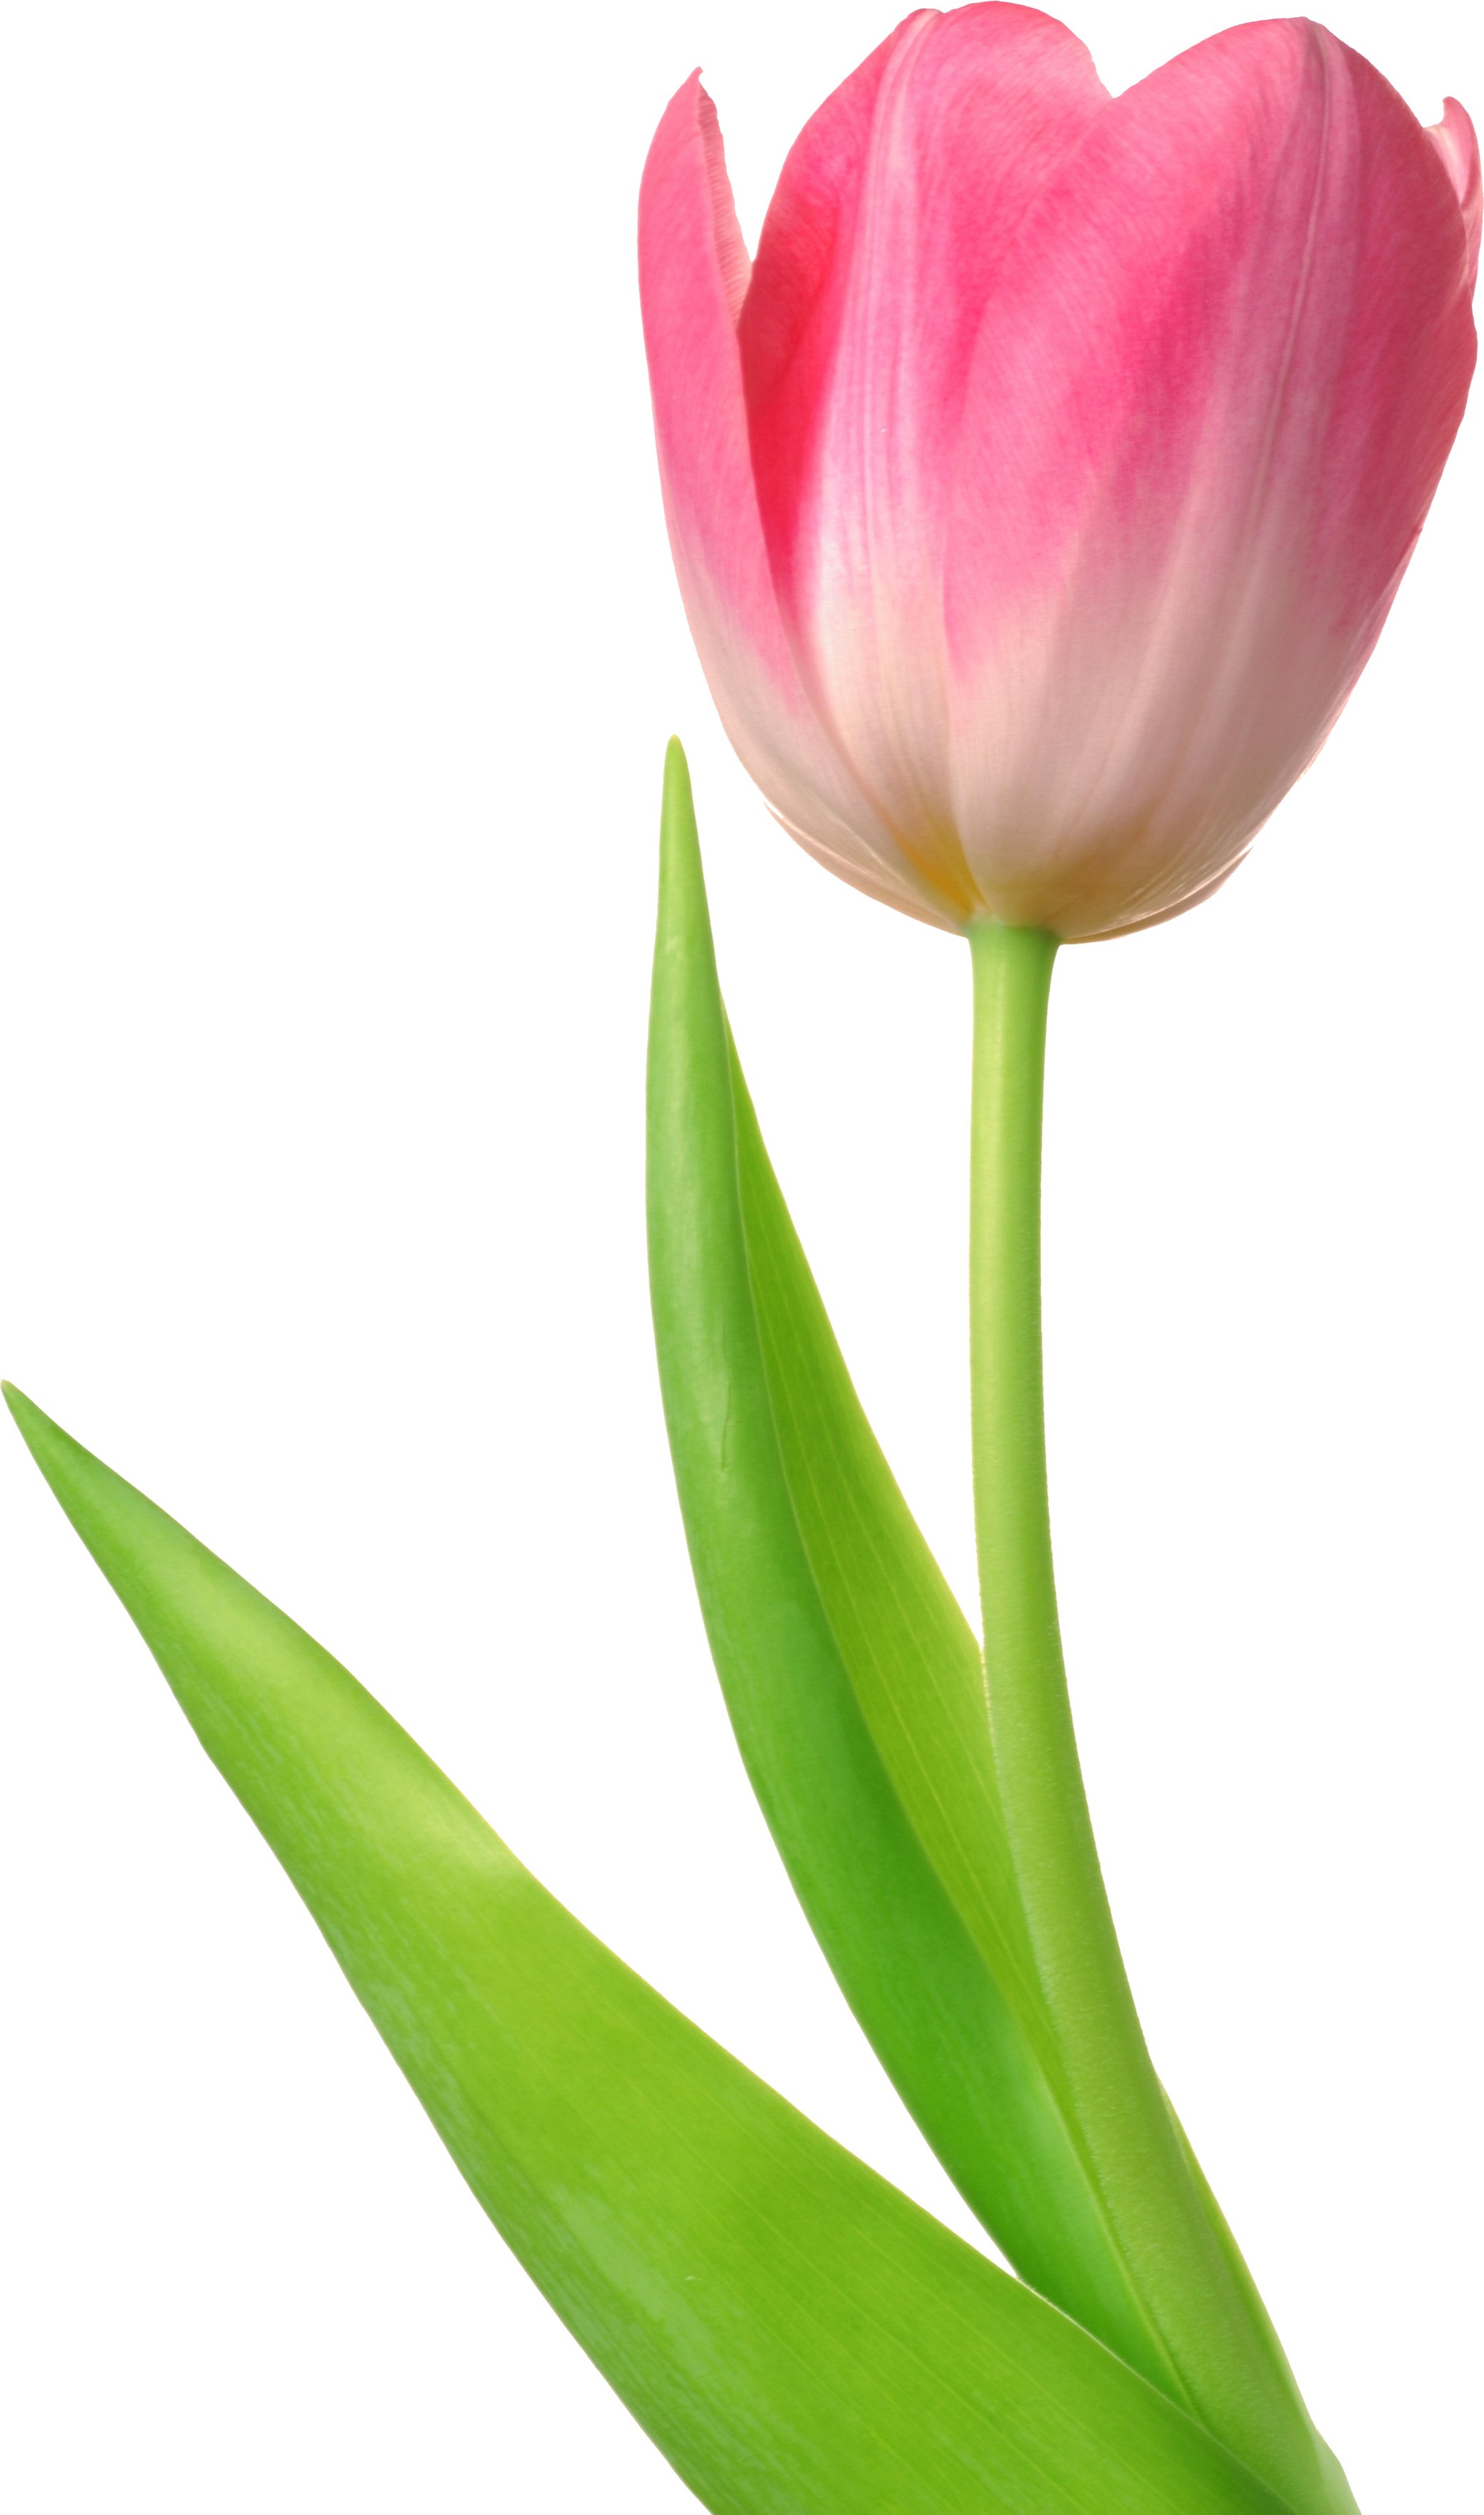 Amazing Tulip Pictures & Backgrounds